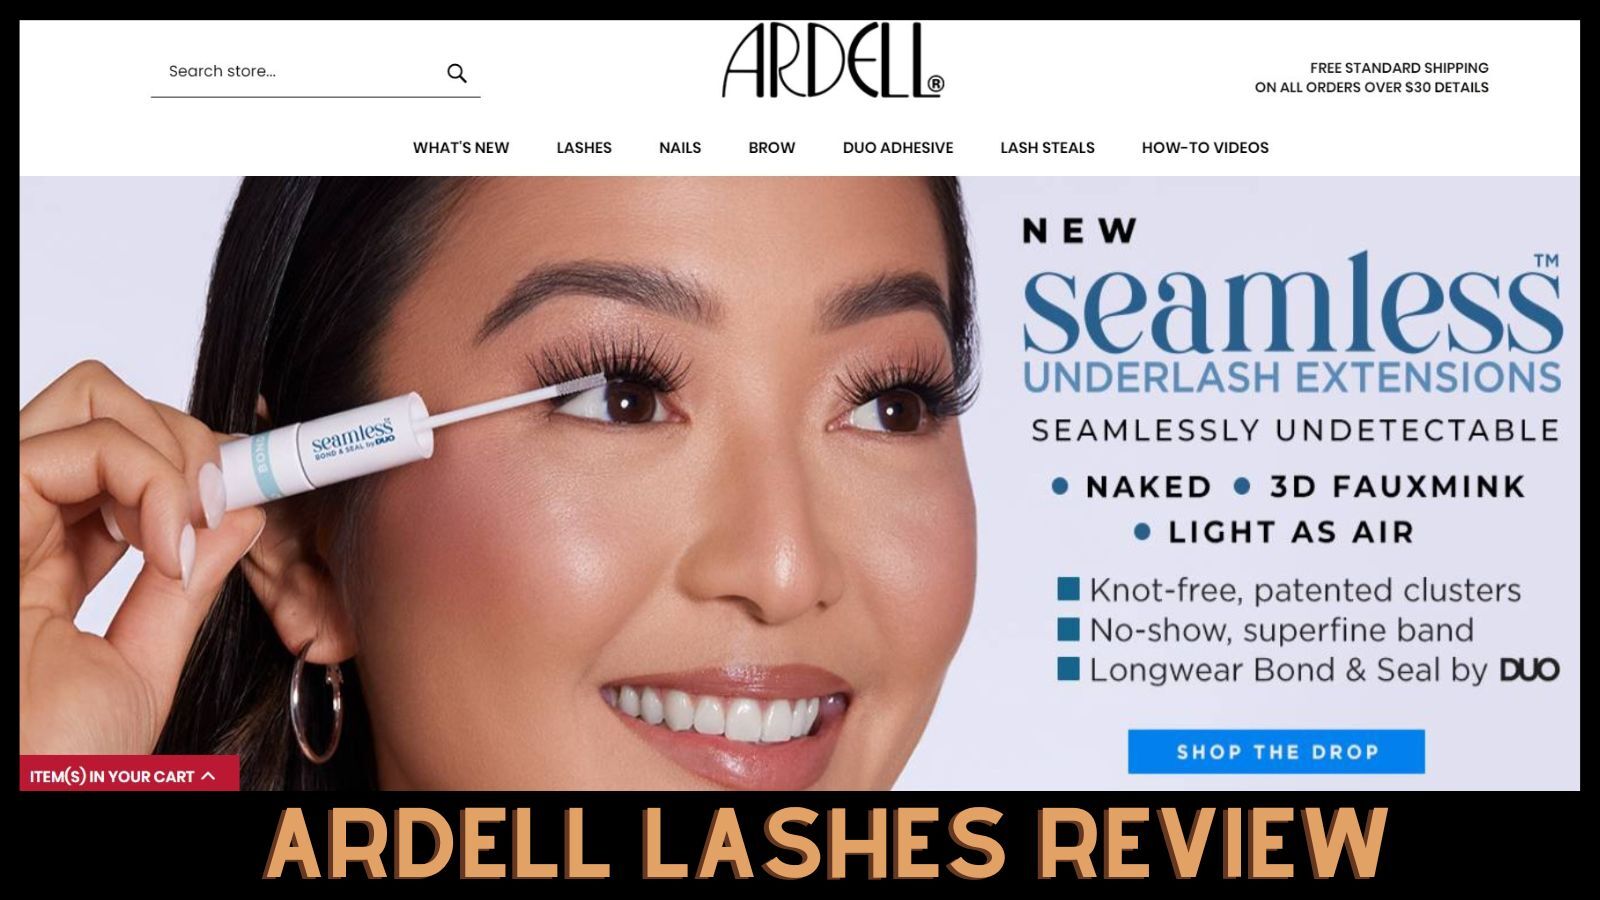 Ardell Lashes Review: Are They Worth the Hype?